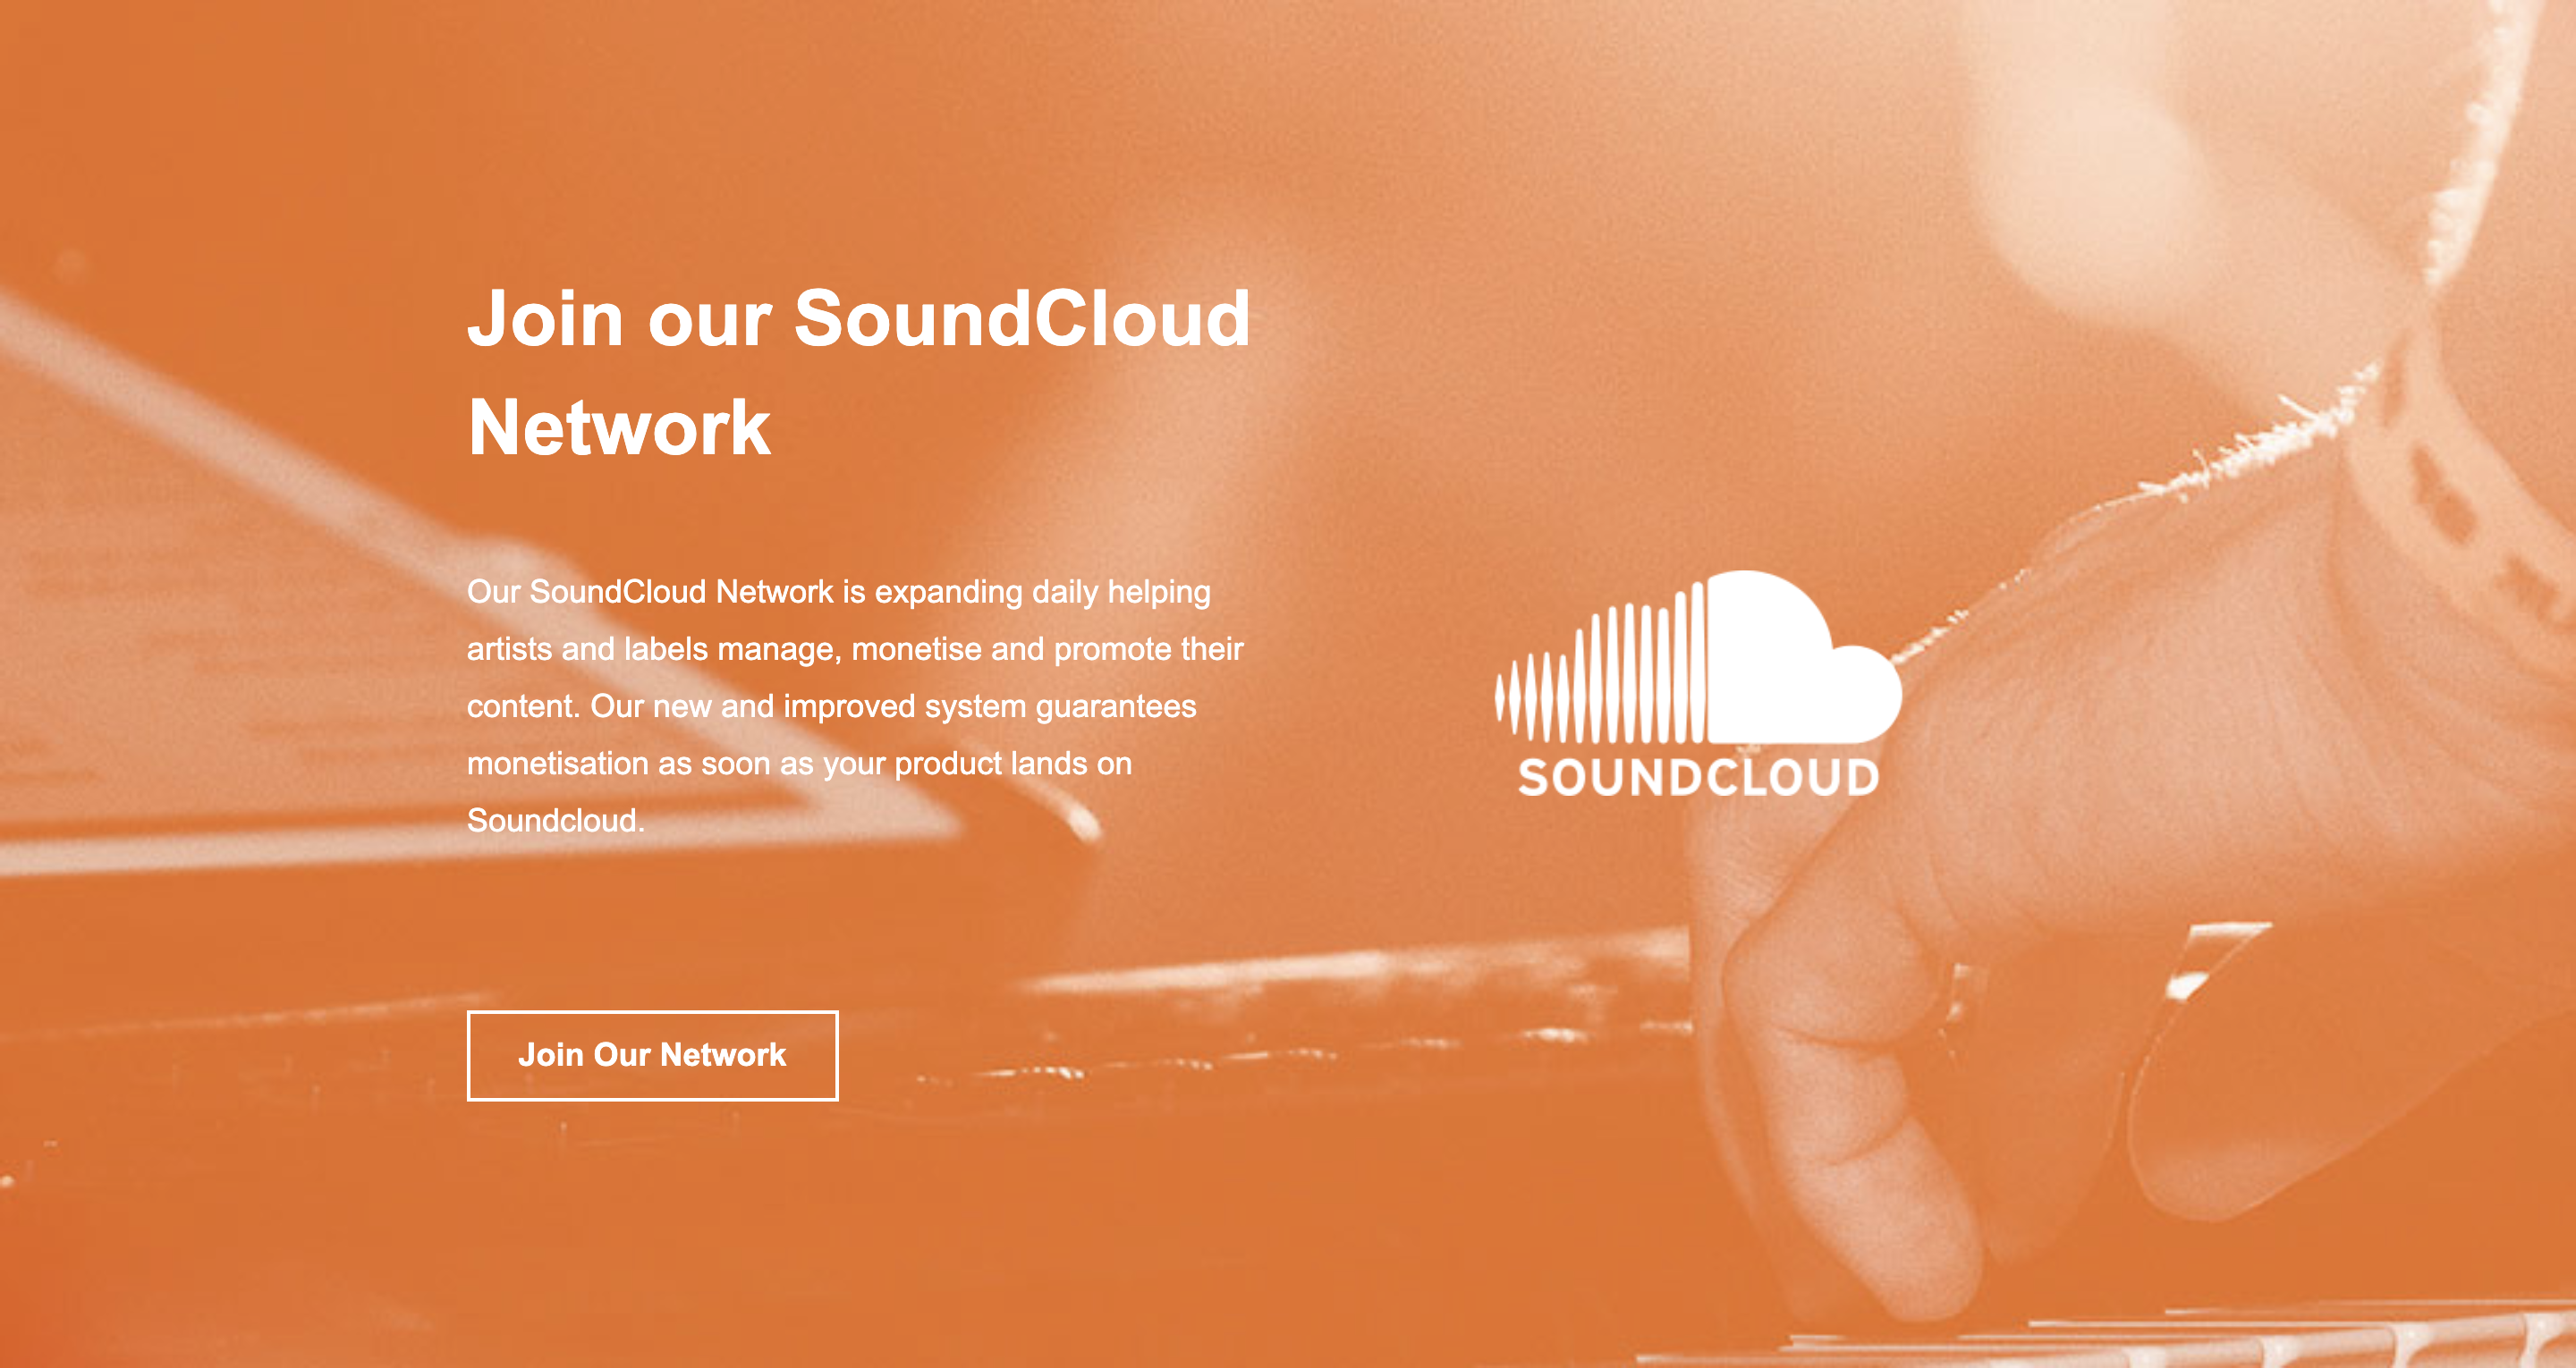 How Much Does Soundcloud Pay Per Stream?